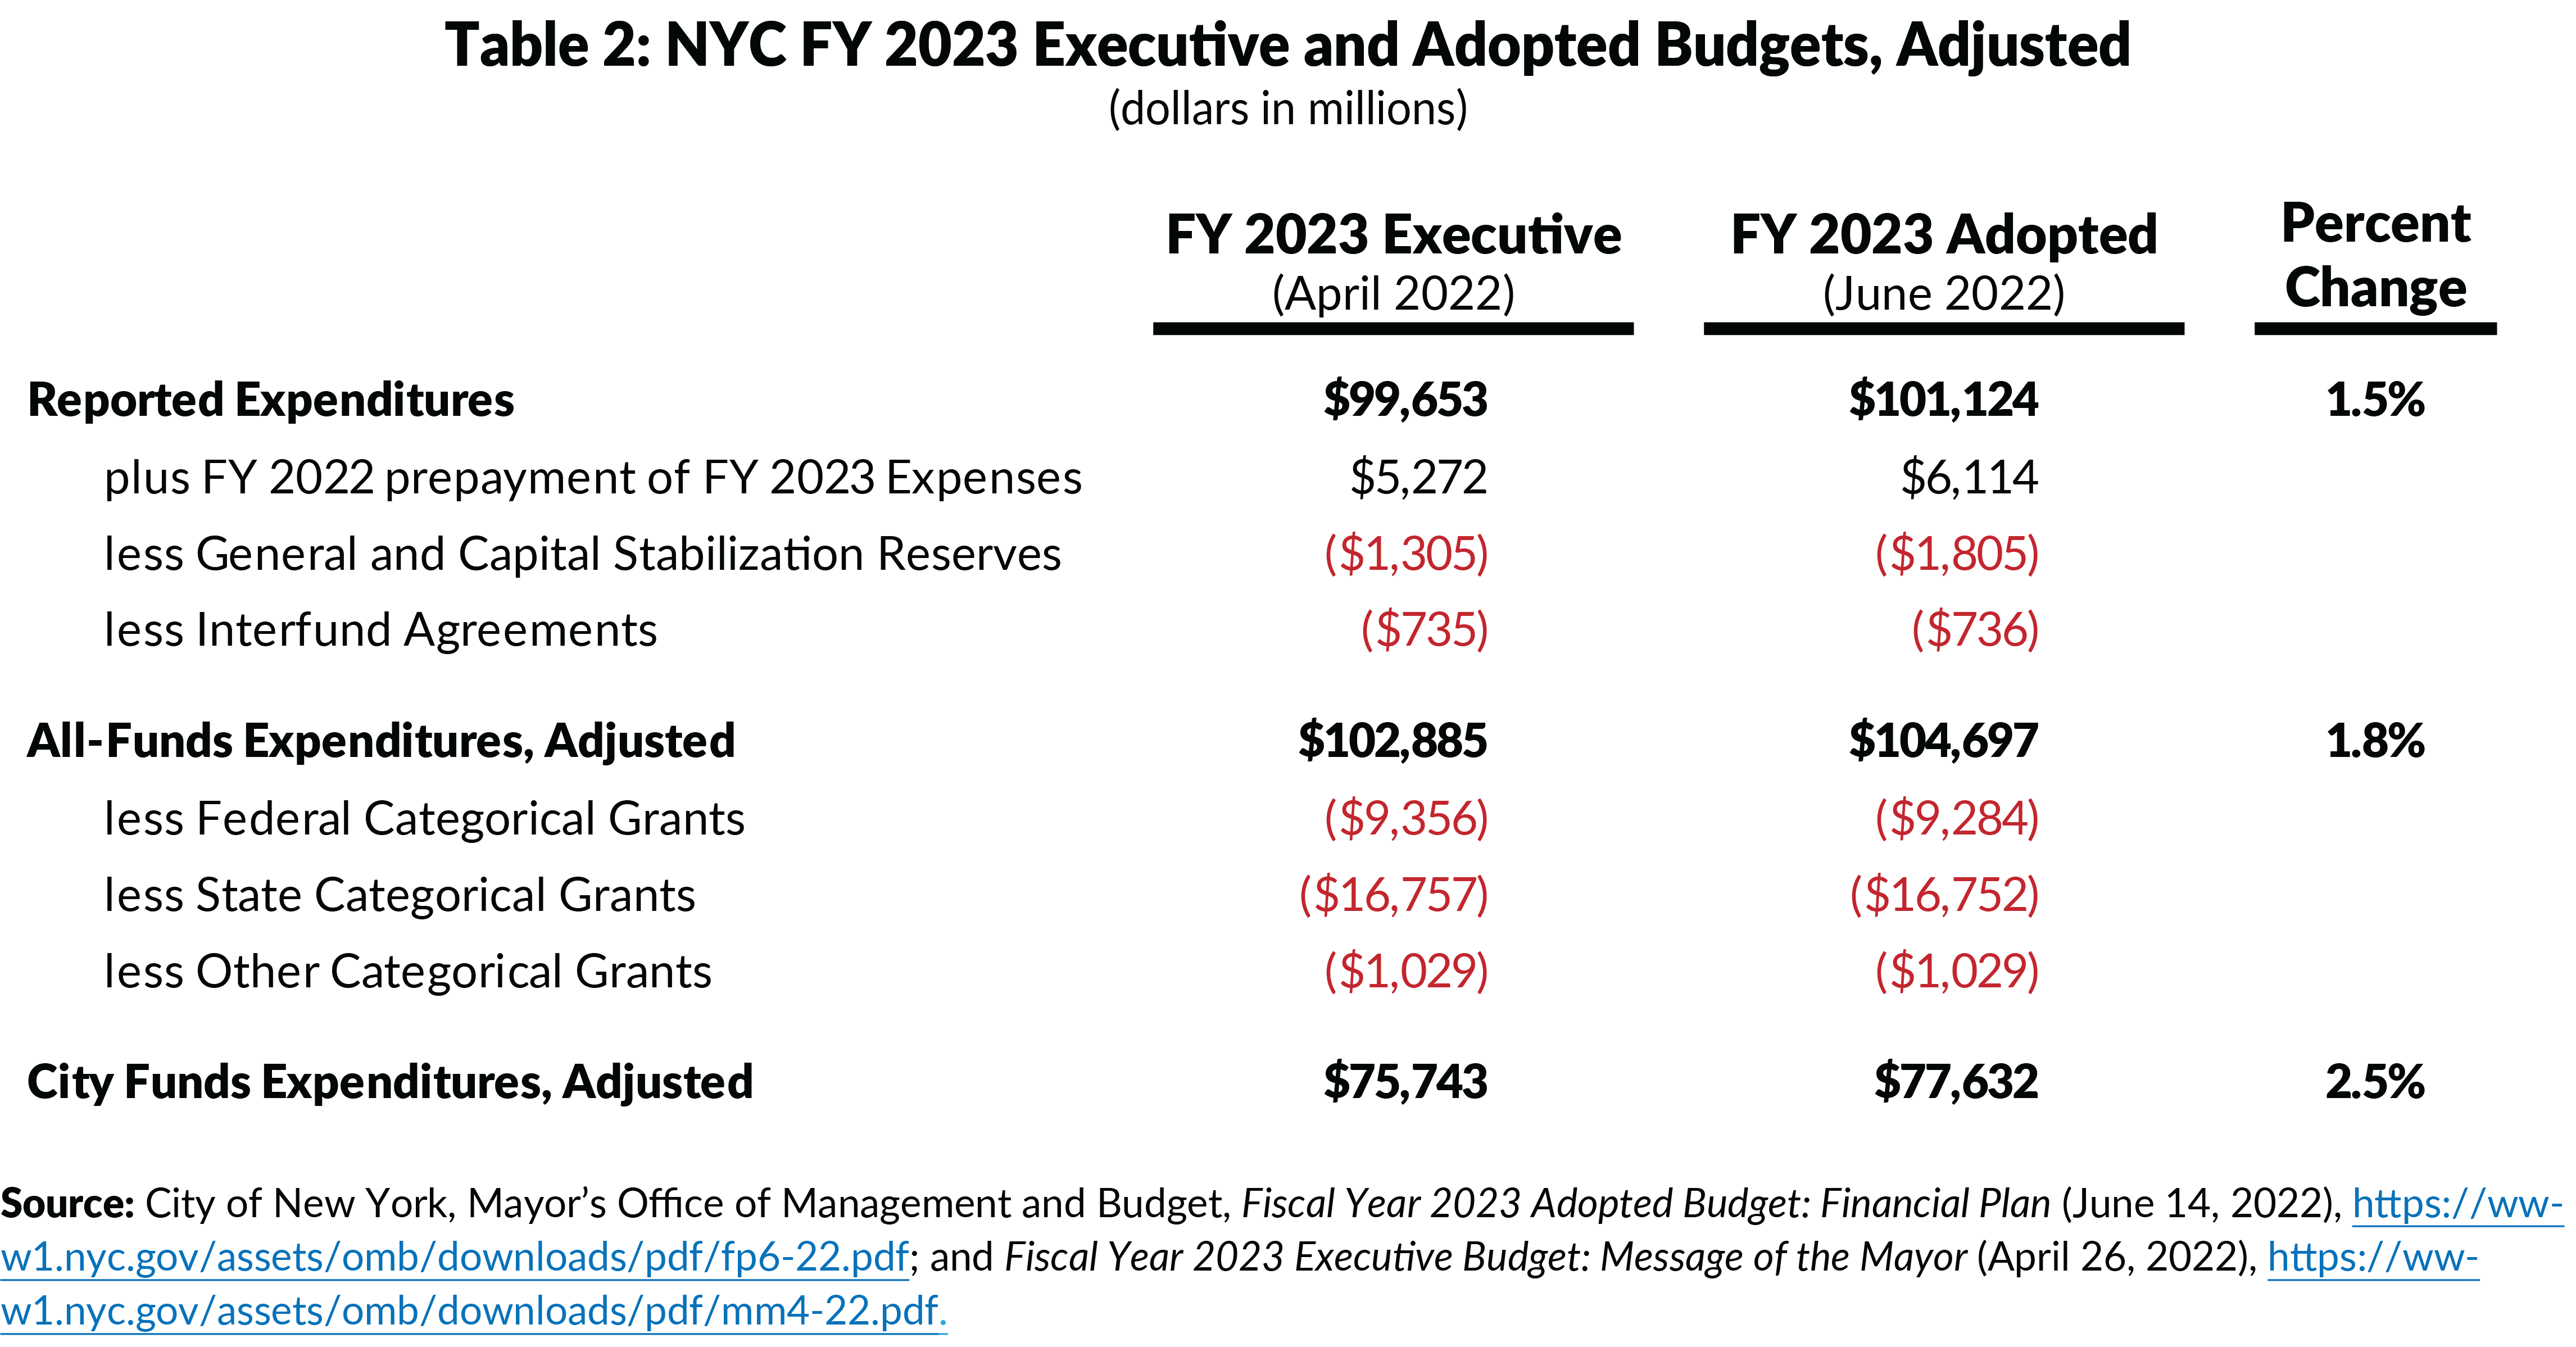 Table 2: NYC Fiscal Year 2023 Adopted Budget, Adjusted, and Comparison to FY2023 Executive